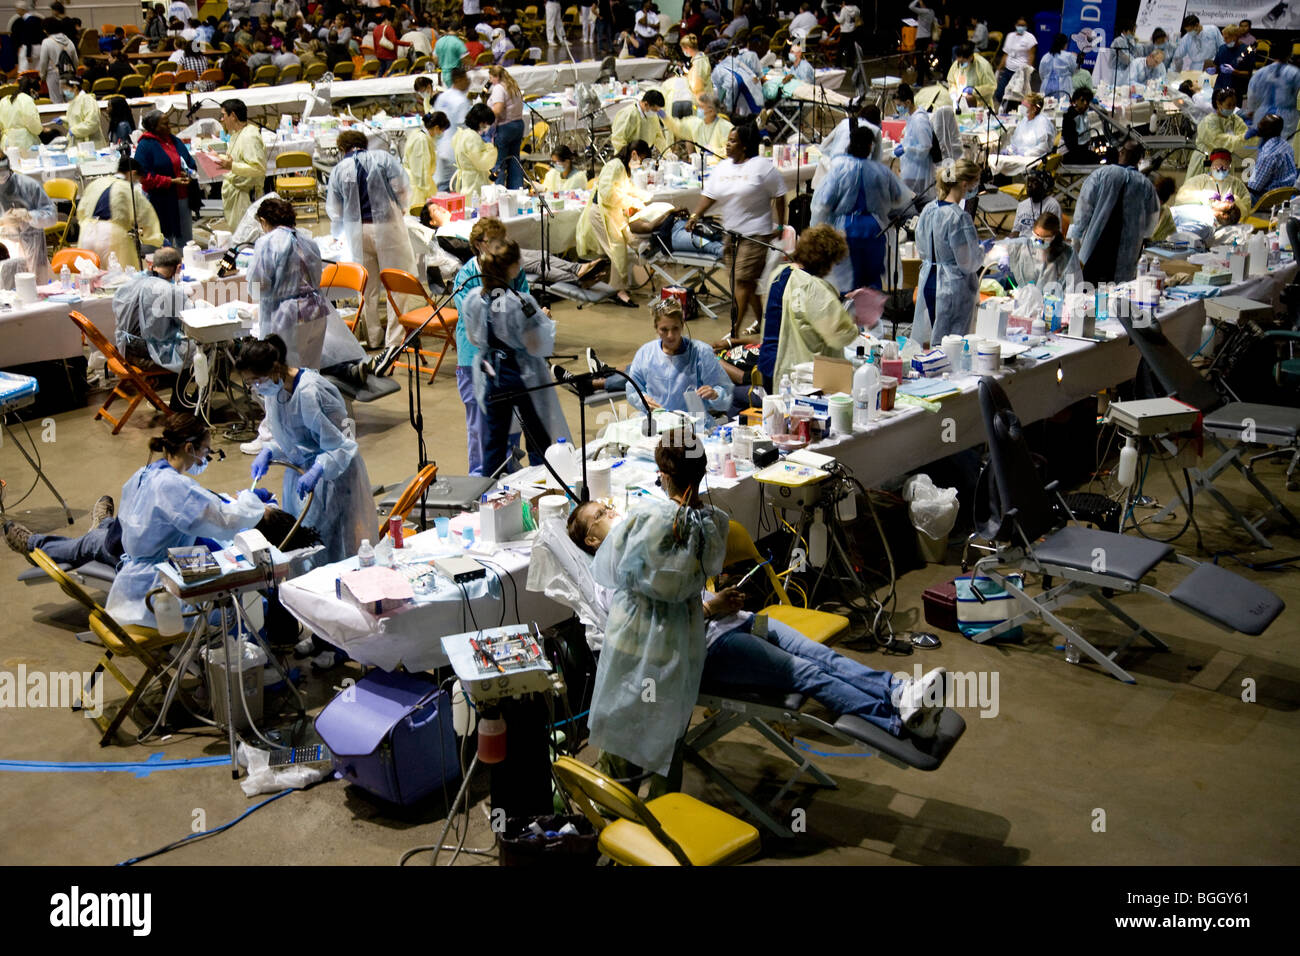 Free health and dental clinic by Remote Area Medical during the week of August 19, 2009, Los Angeles, CA Stock Photo